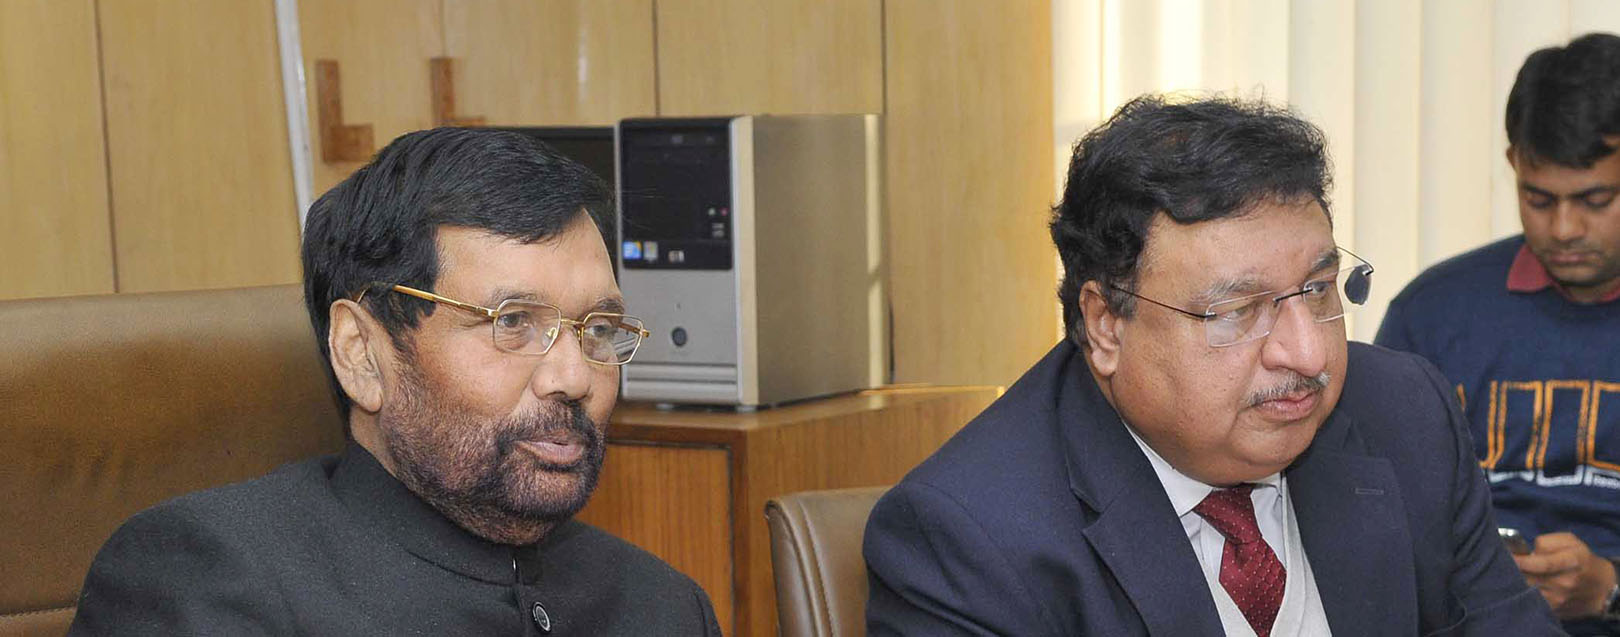 Govt may consider imposing duty on wheat imports: Paswan